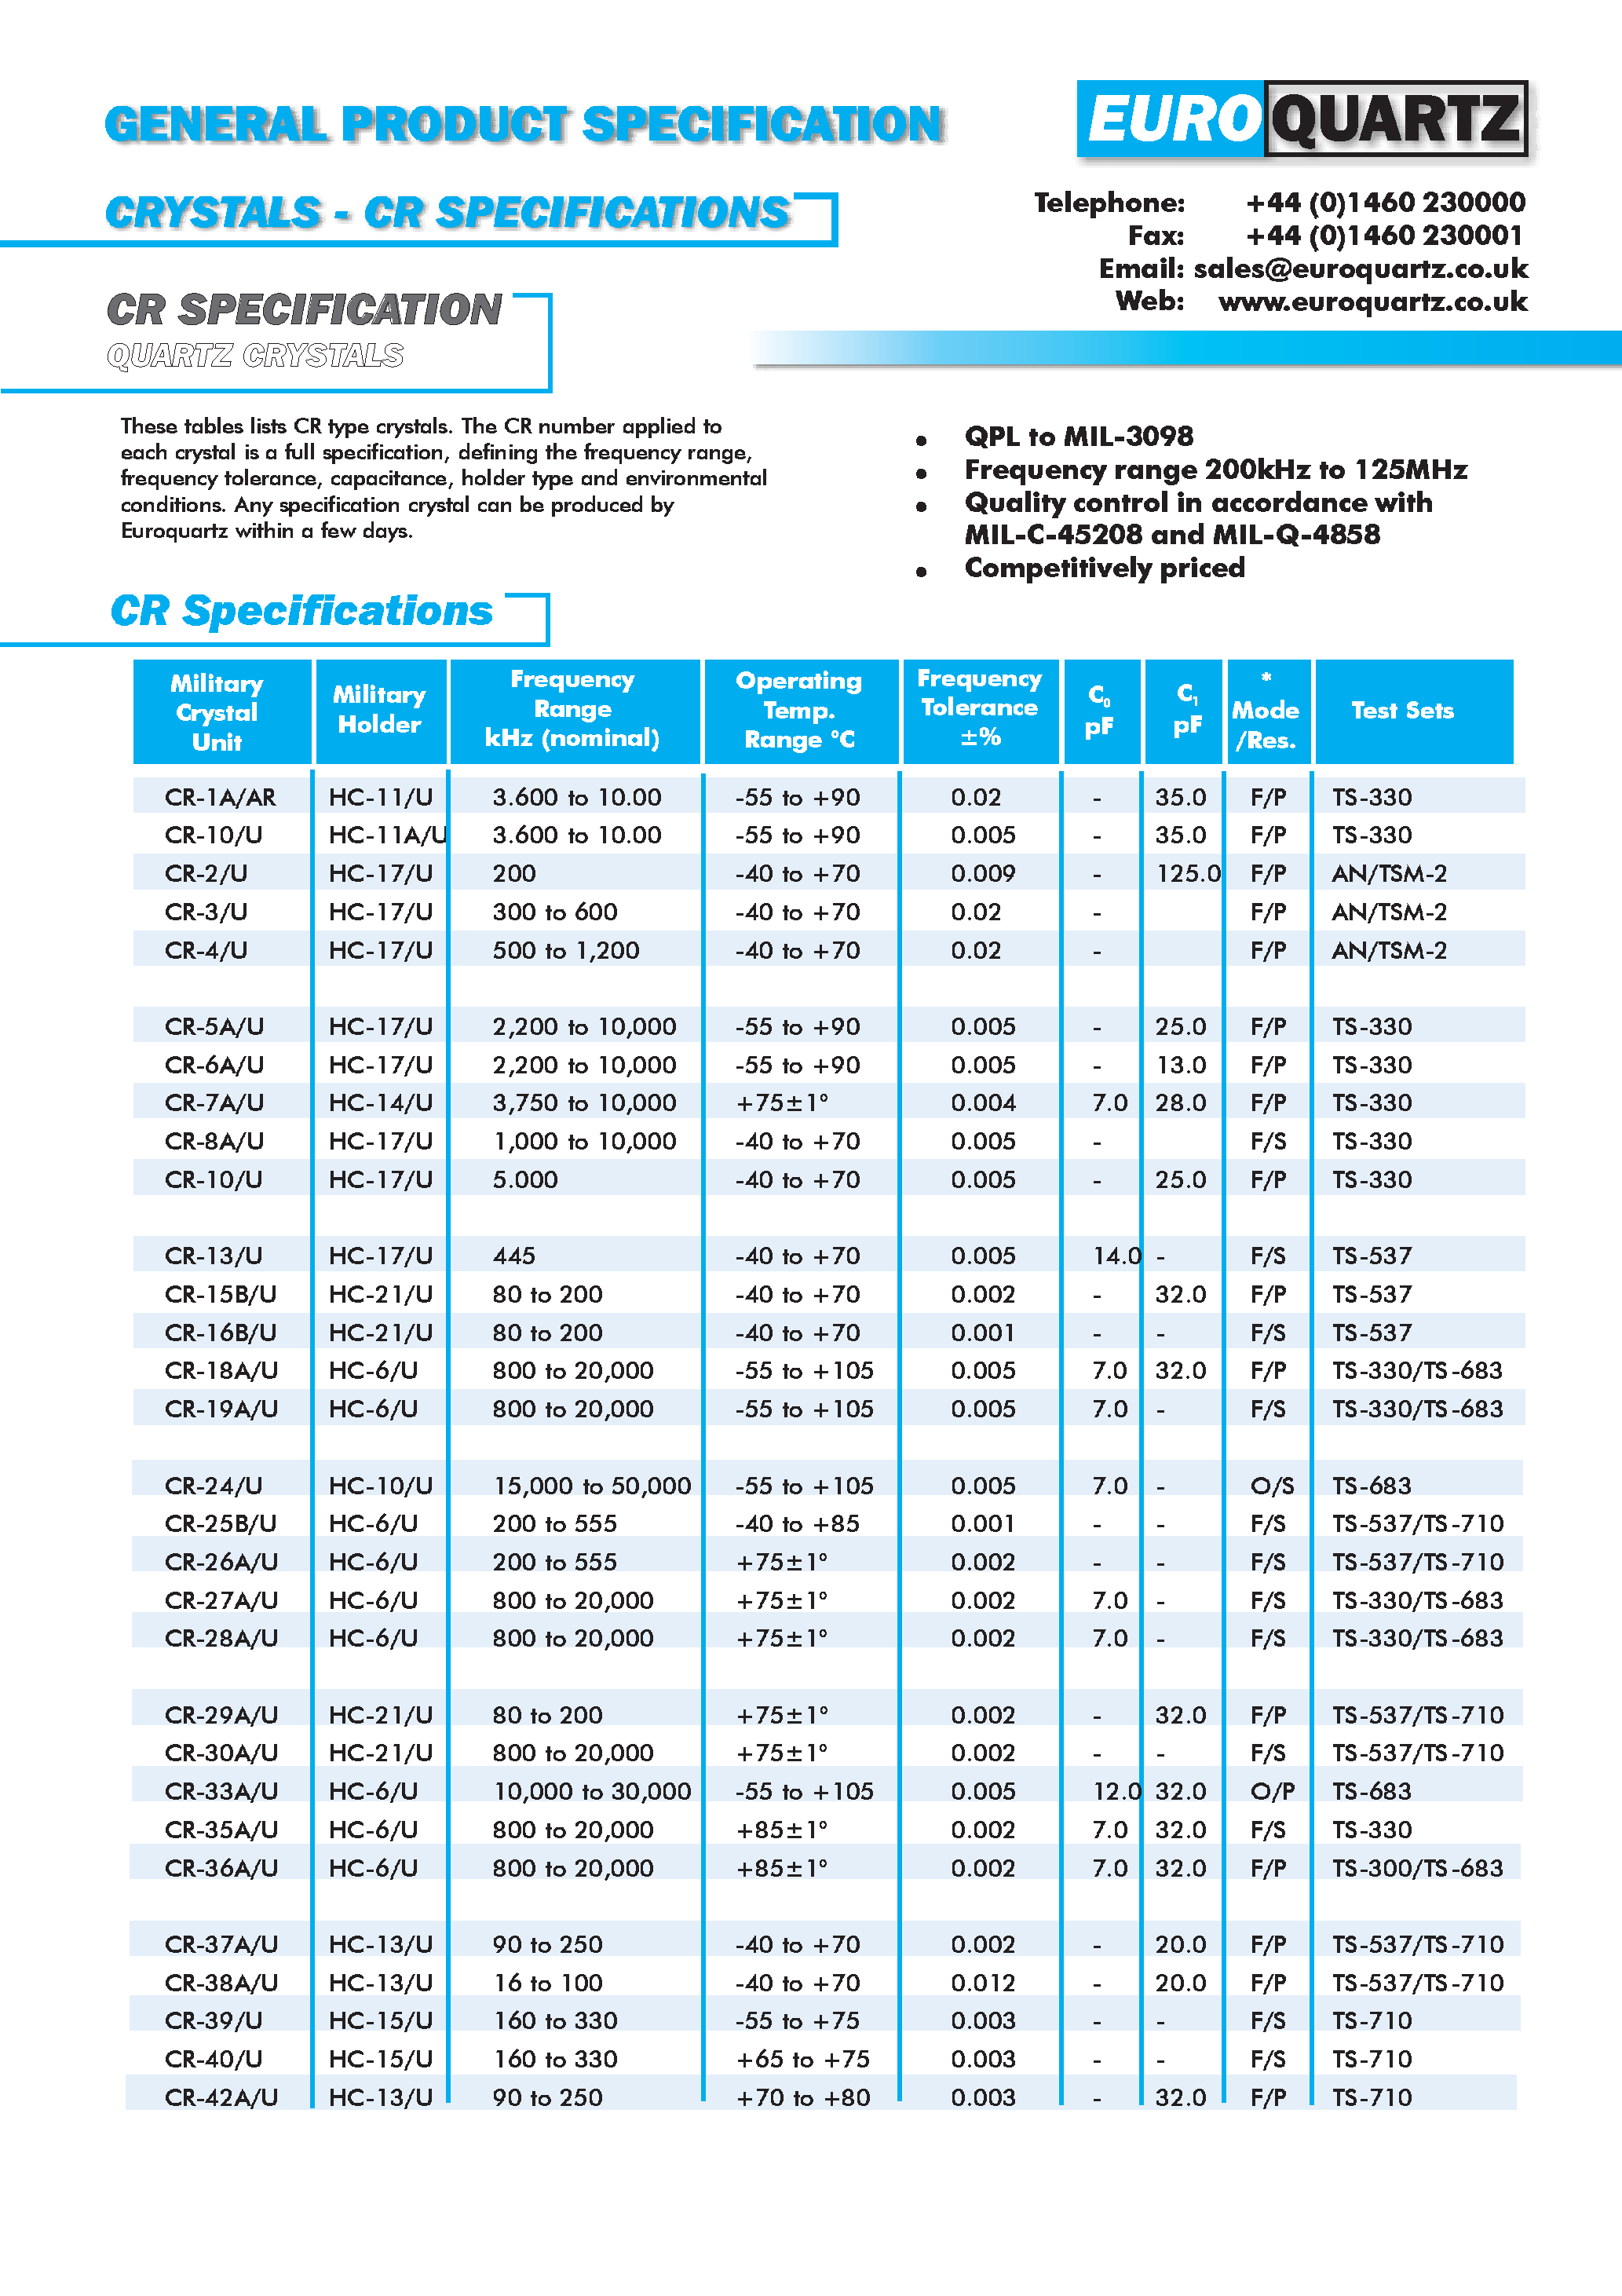 Datasheet CR-102/U - COMMERCIAL EQUIVALENTS TO MIL/CR CRYSTALS page 1